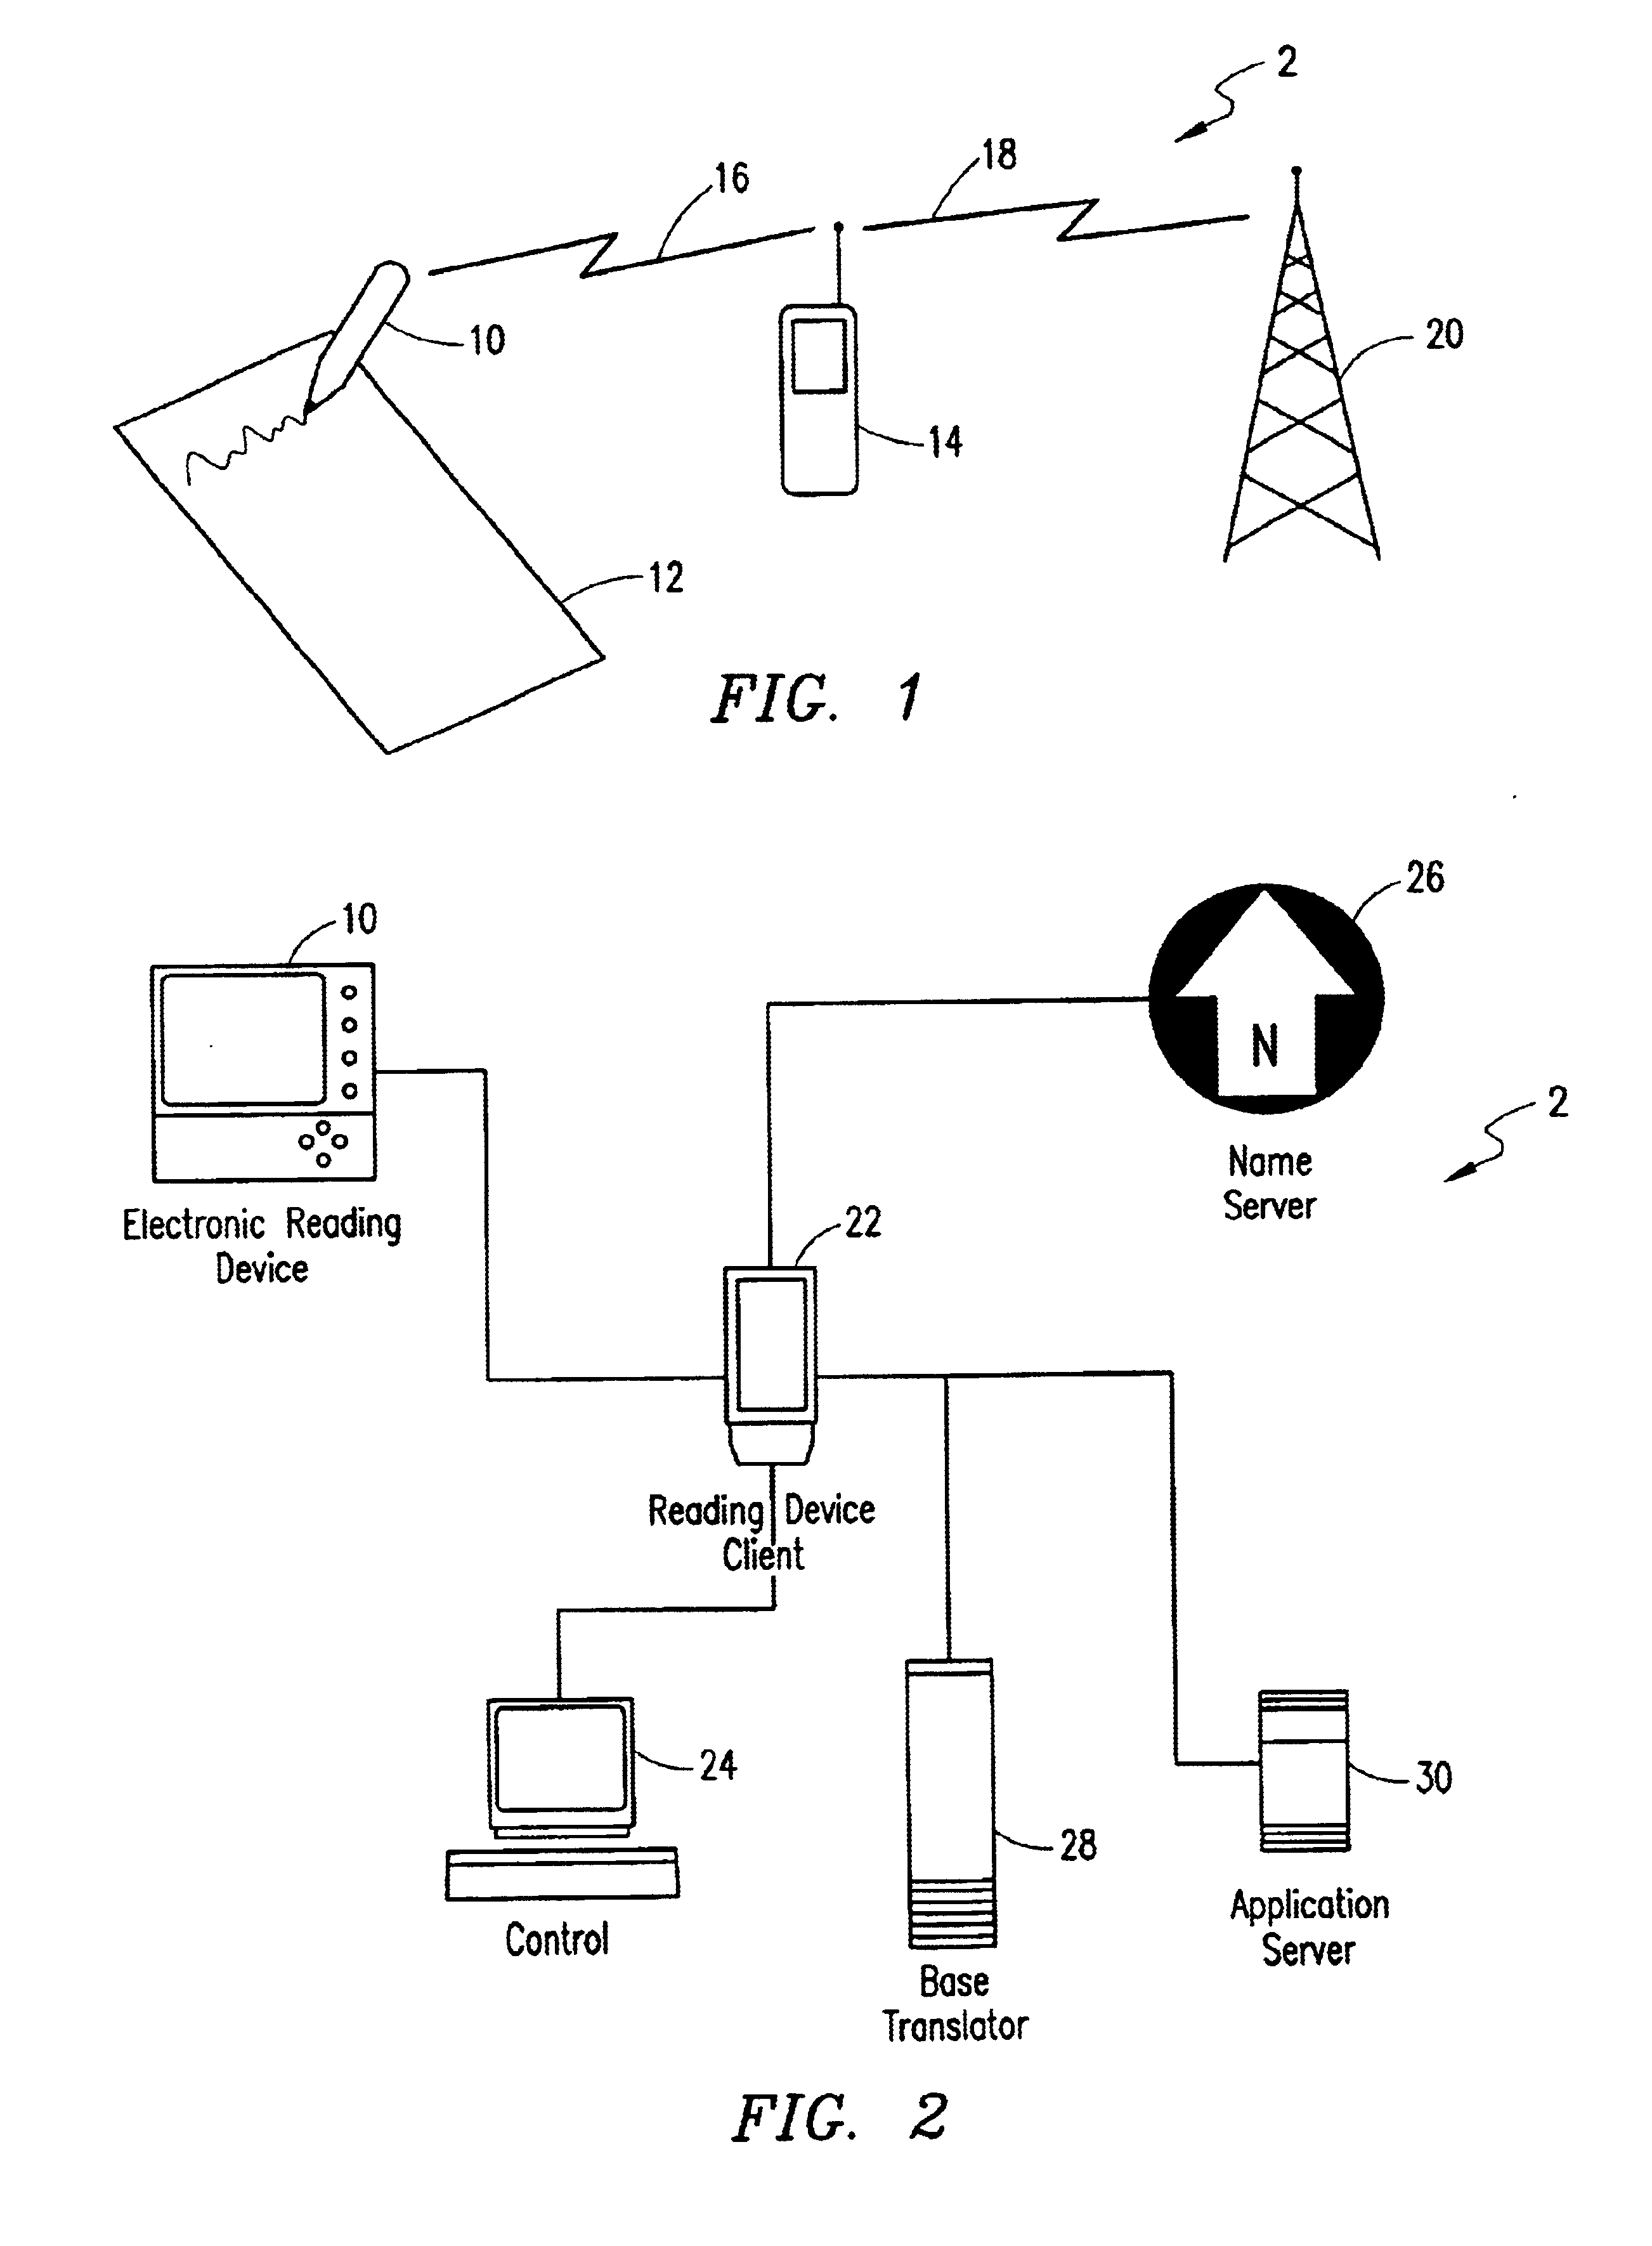 Positioning applications for an electronic reading device